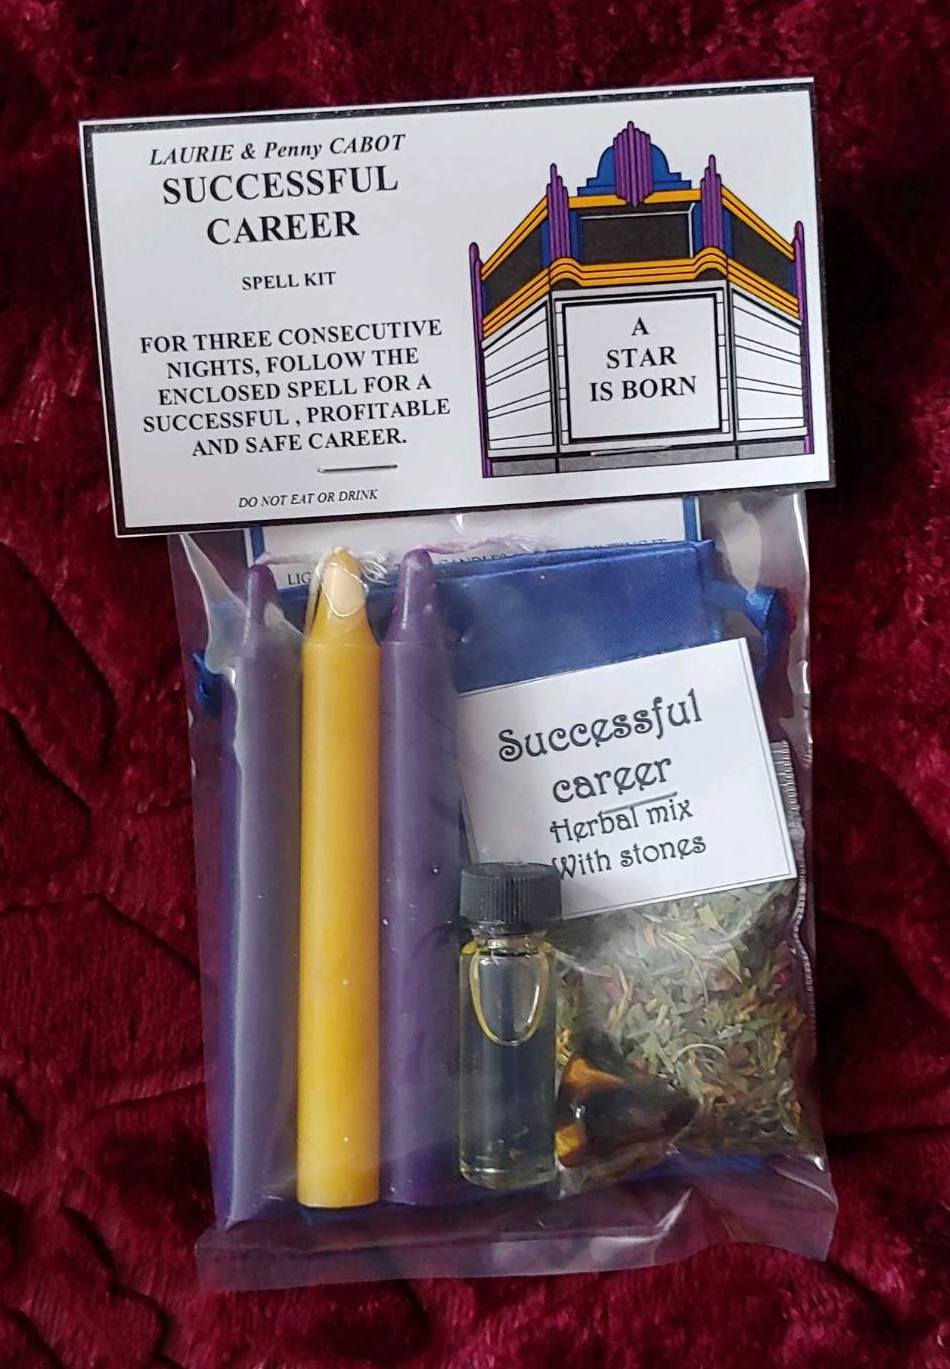 Successful Career Spell Kit by Laurie & Penny Cabot